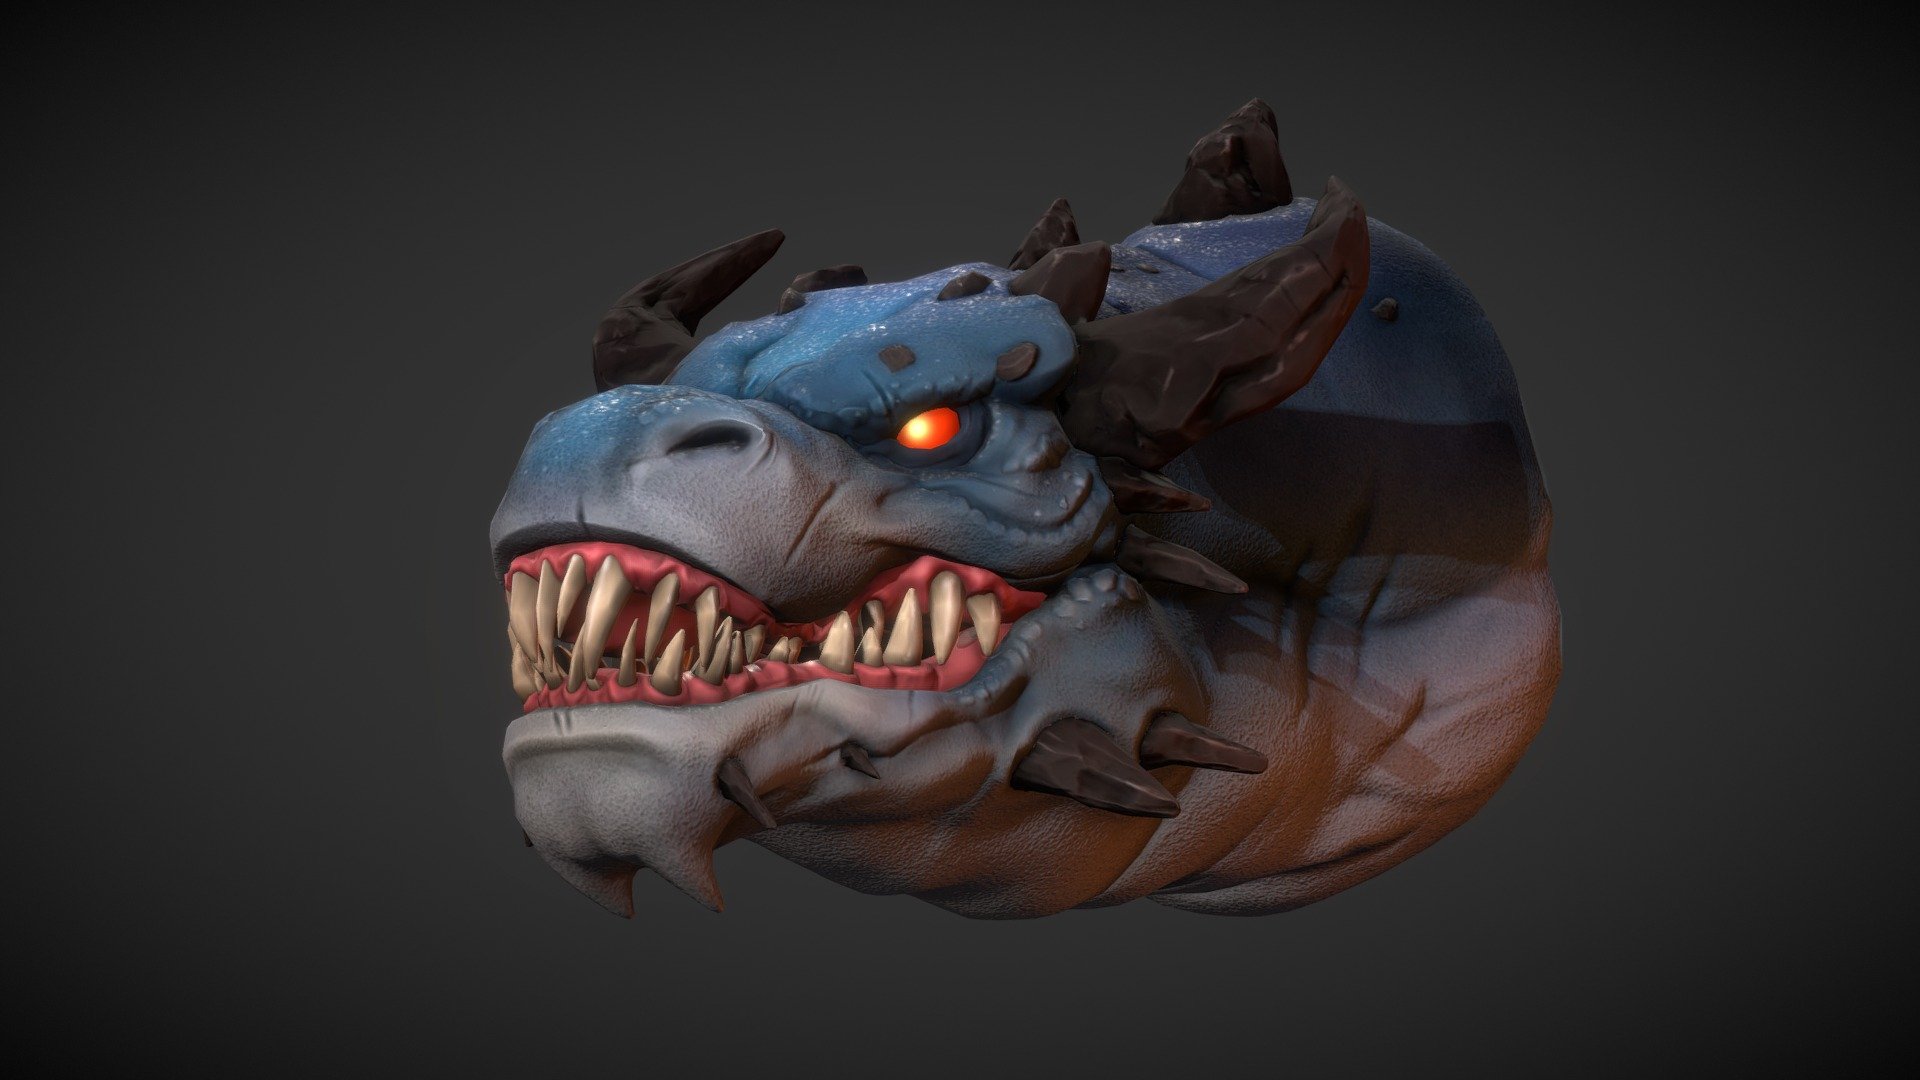 Stylized dragon bust for practice :)

I reaaallly like making stylized stuff but I am still trying to get the hang of it. I want to be confident enough to be able to make good pieces every time but alas-

Concept by Labros Panousis :)
Check out my artstation for my other stuff :0 - Dragon Bust - 3D model by Jenise Ong (@jenise_ong) 3d model